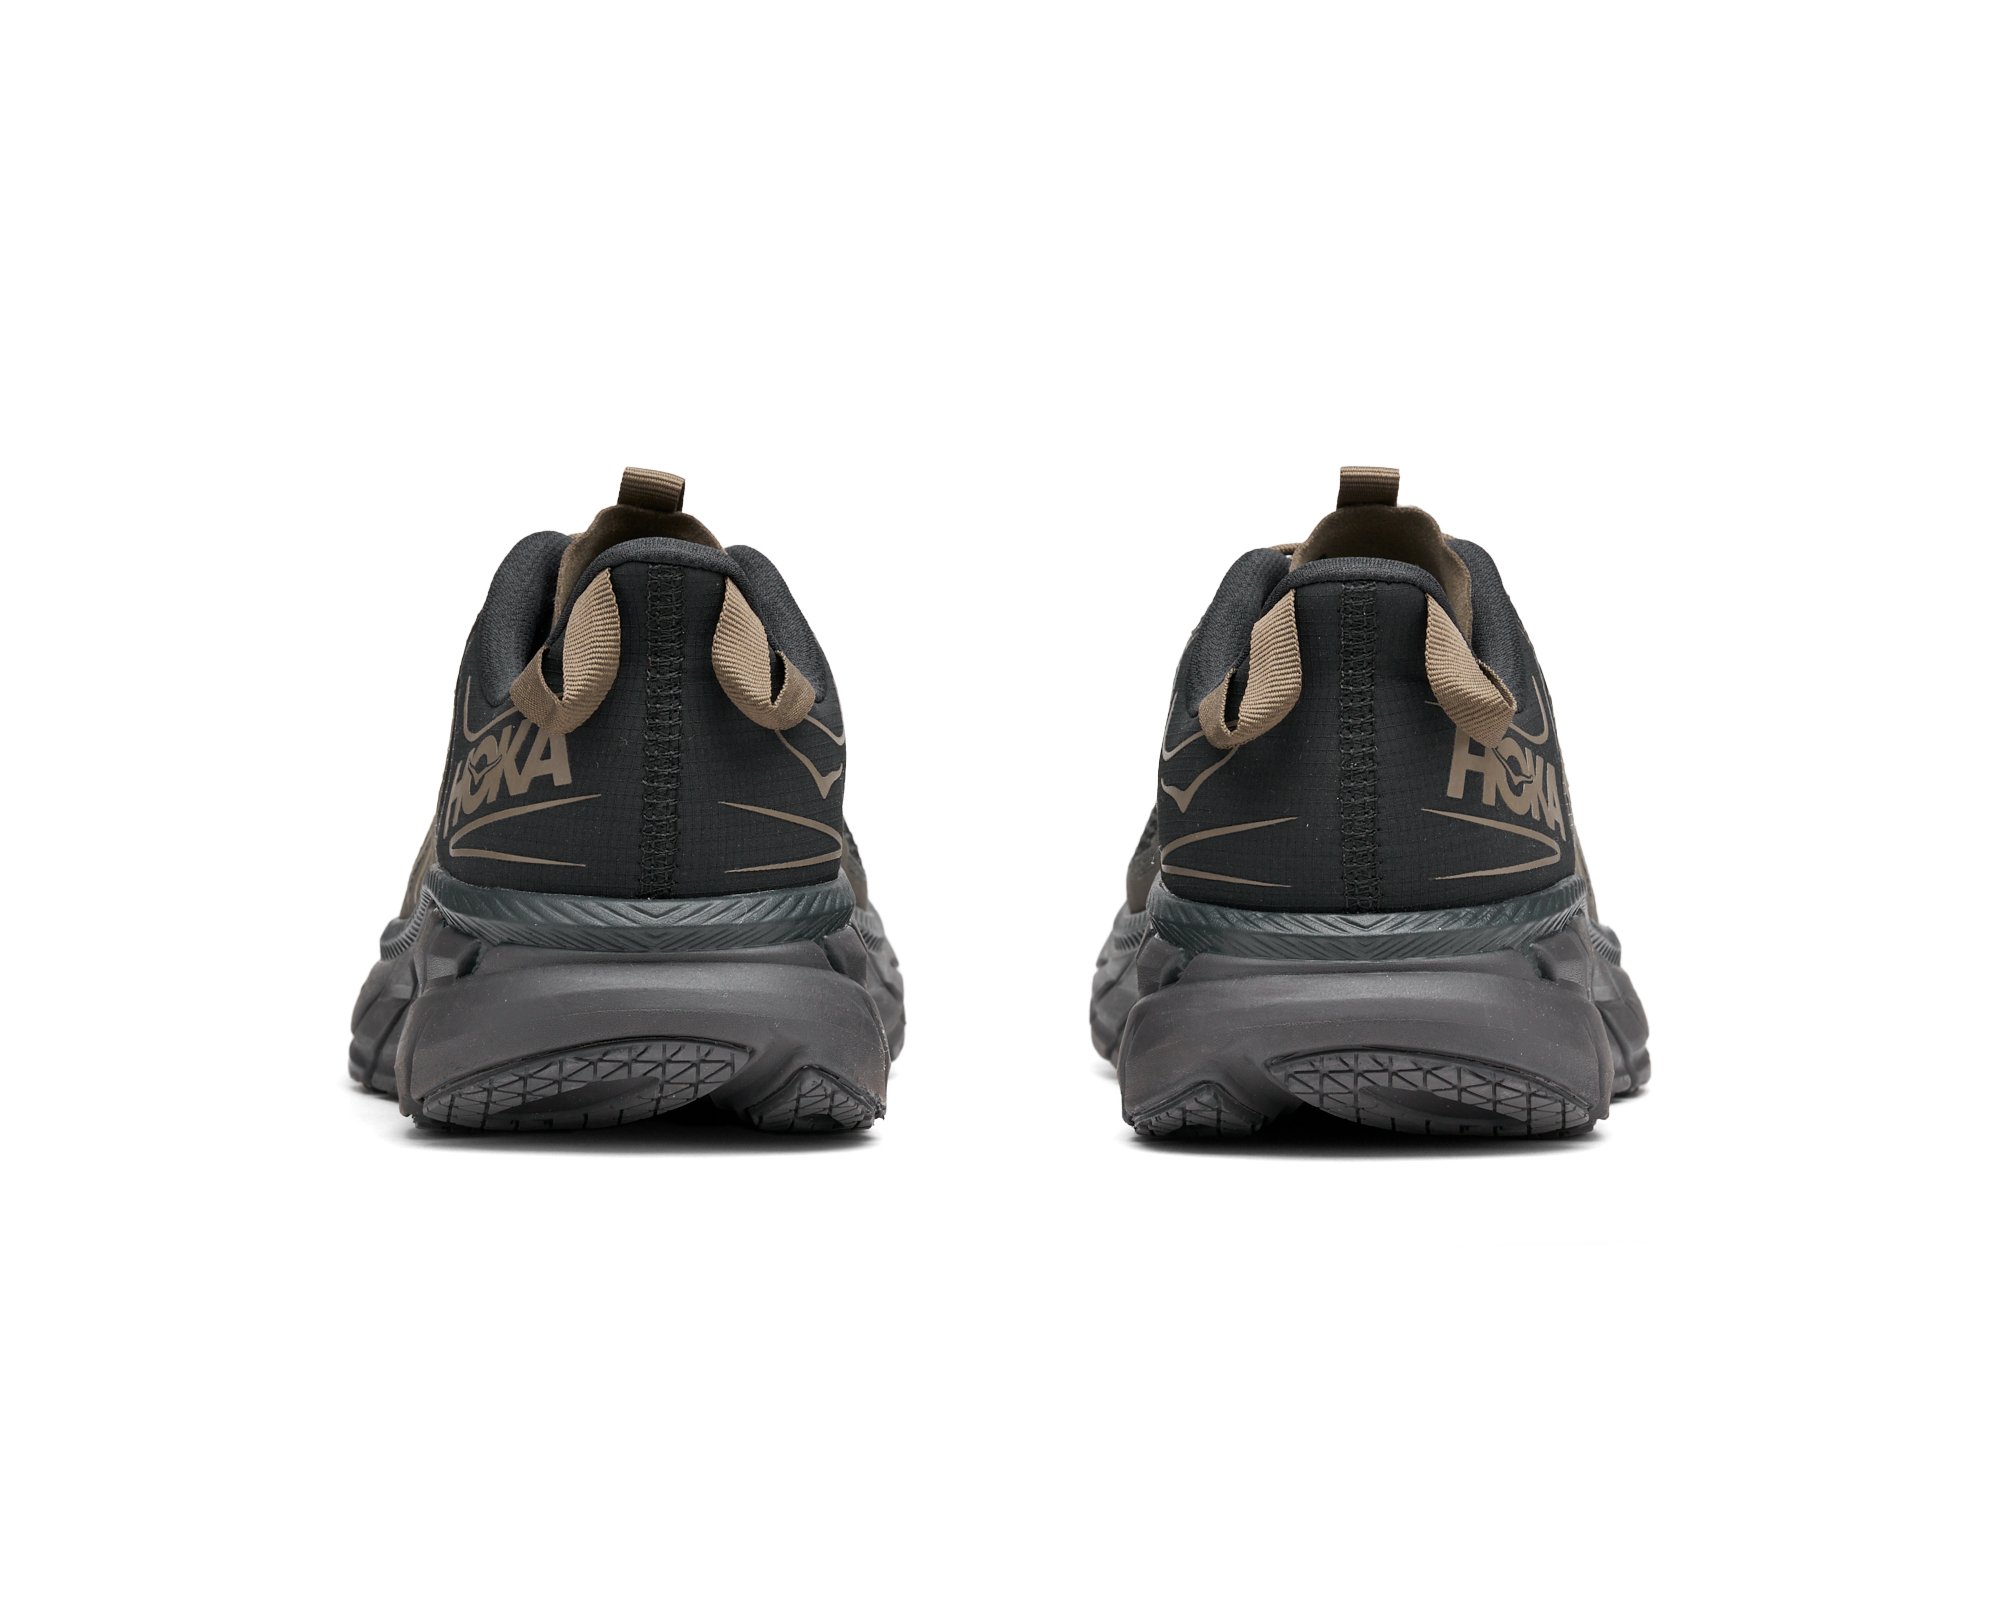 HOKA and SATISFY Blend Road and Trail Performance With Clifton LS — eye_C